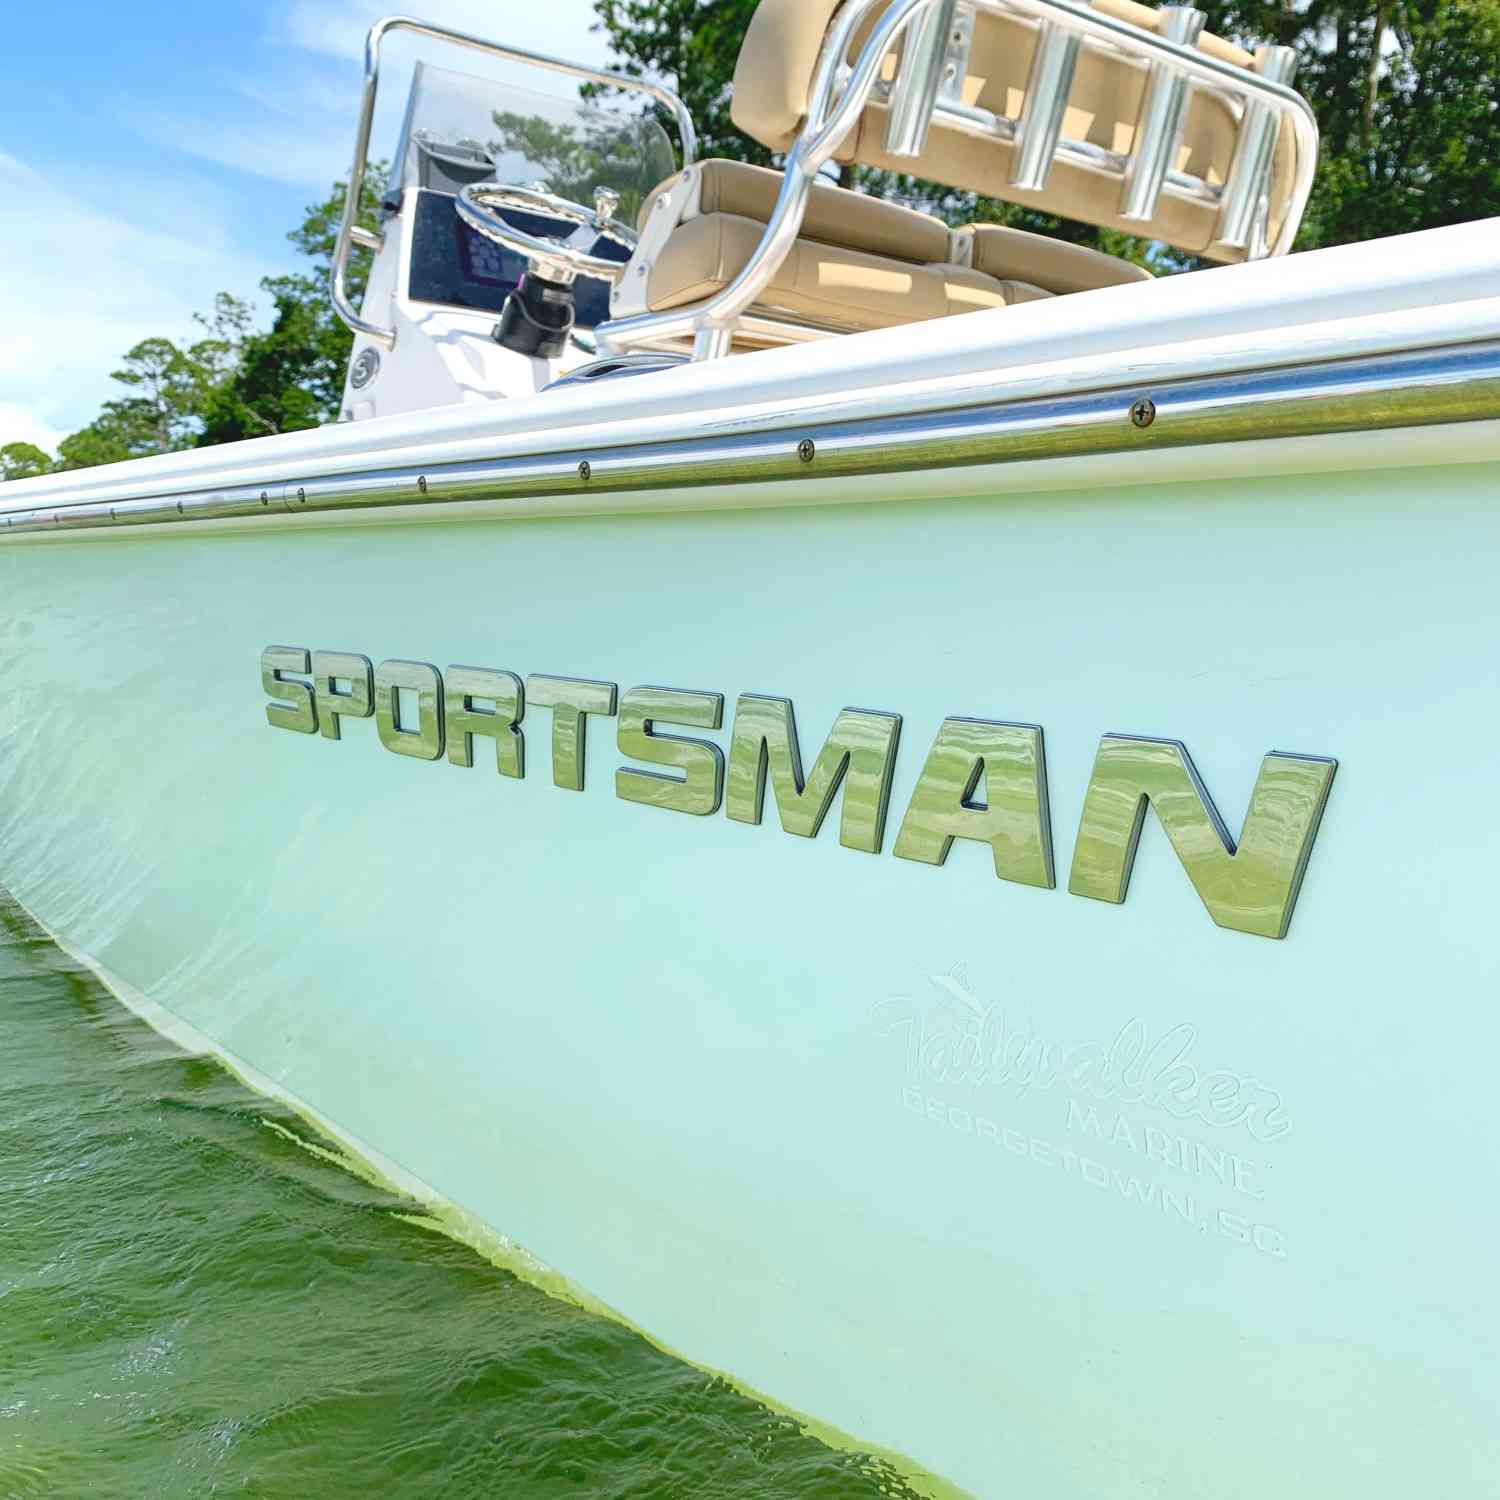 This photo of my Sportsman Masters 207 was taken on Kingsley Lake, FL just off the shore of Cam...